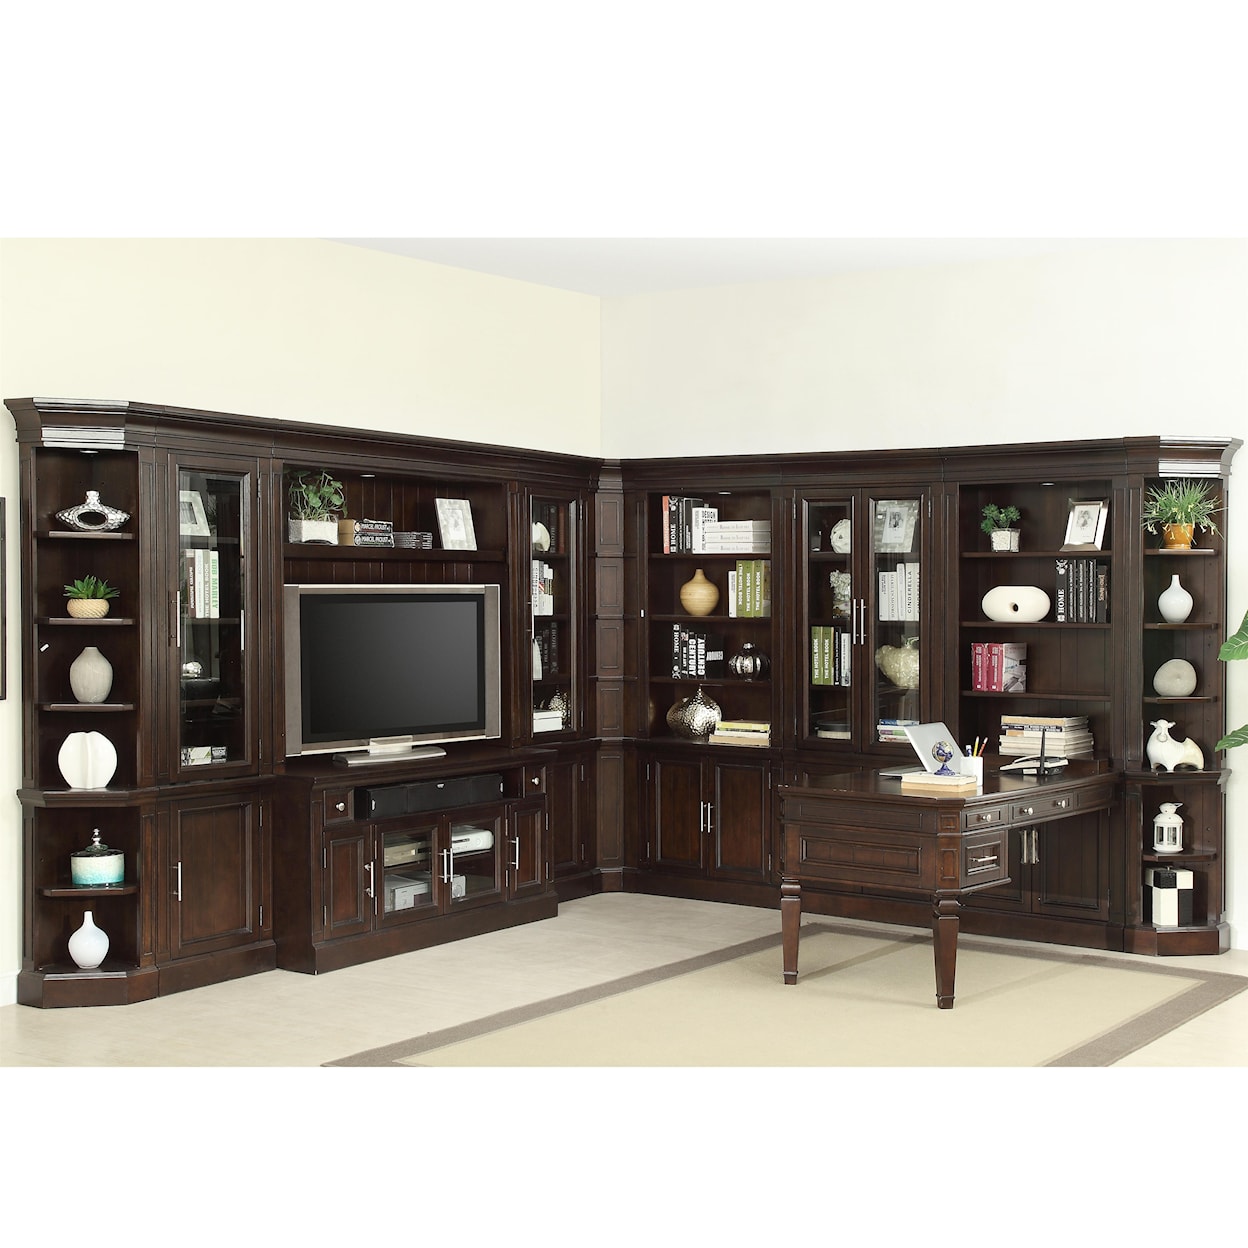 Parker House Stanford Wall Unit